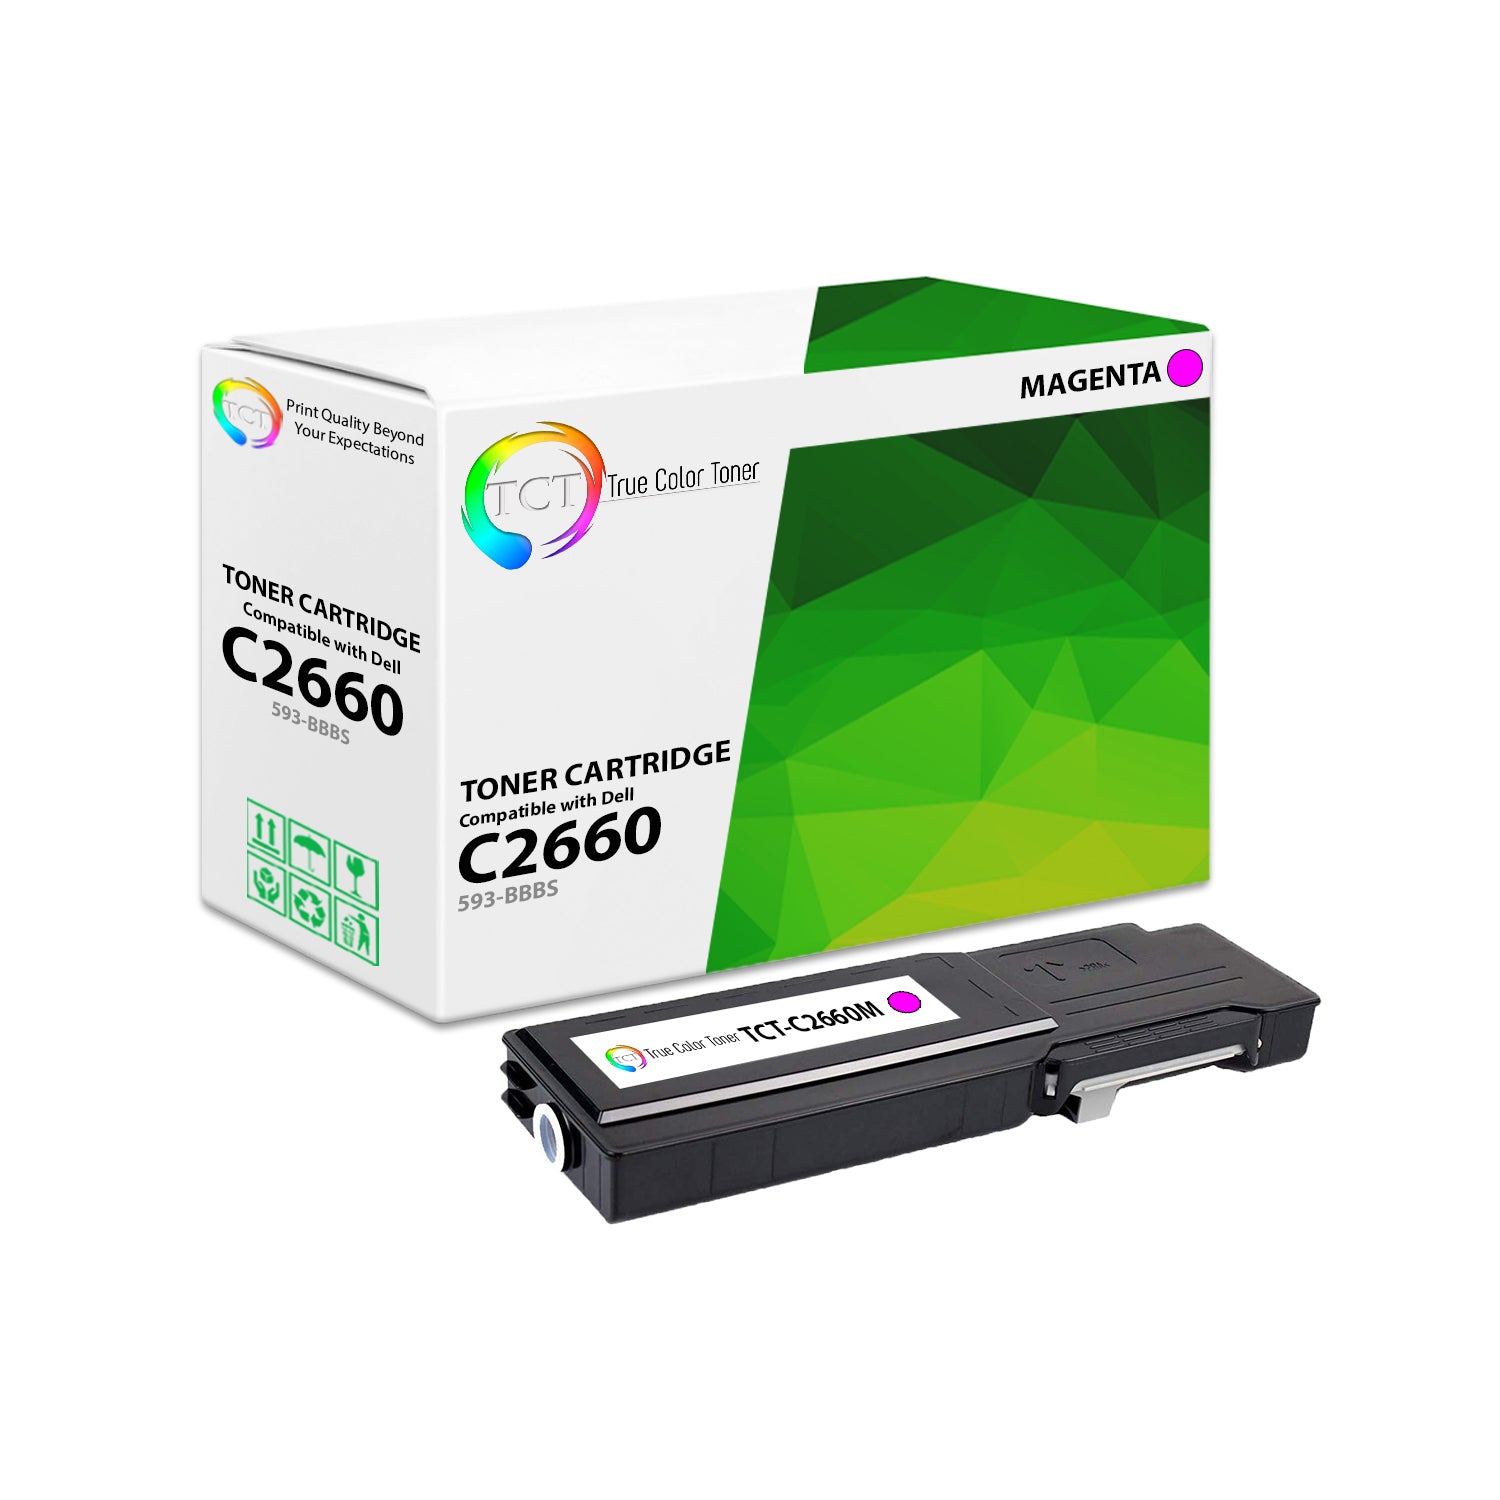 TCT Compatible High Yield Toner Cartridge Replacement for the Dell C2660 Series - 1 Pack Magenta